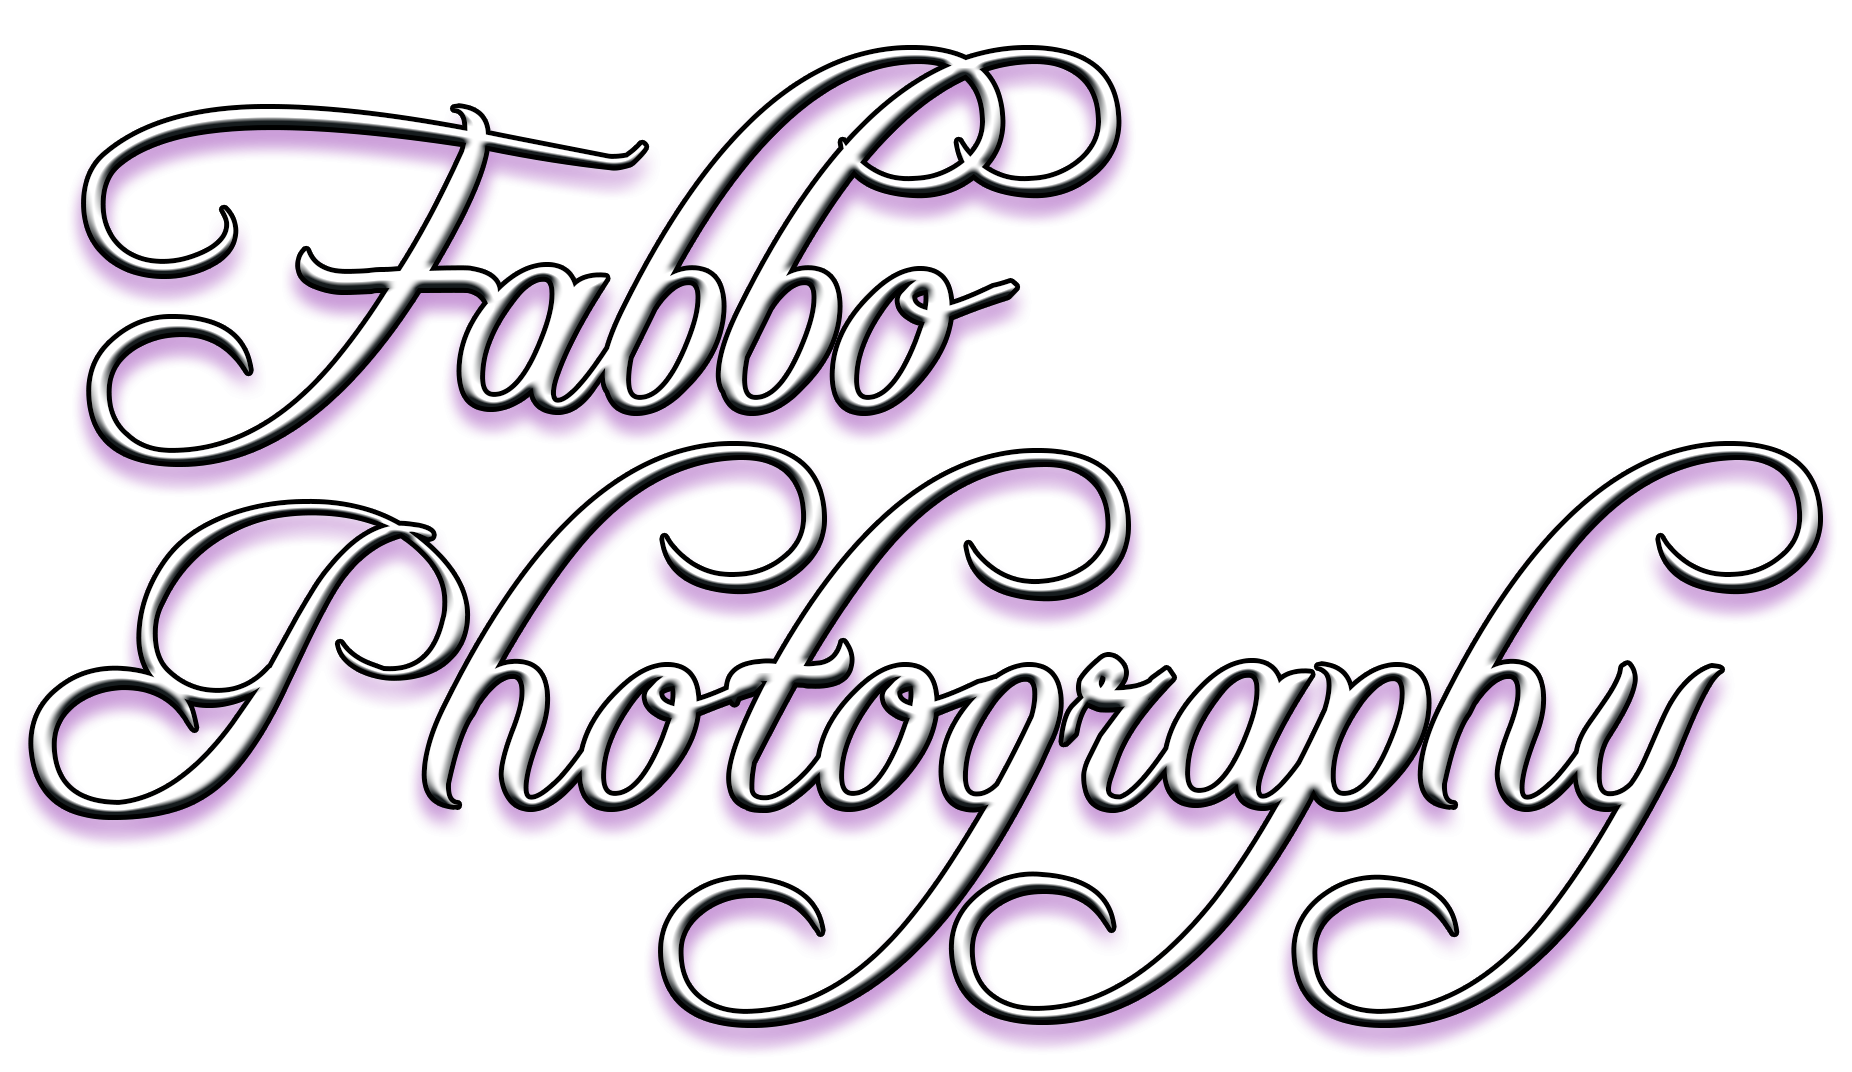 Fabbo Photography